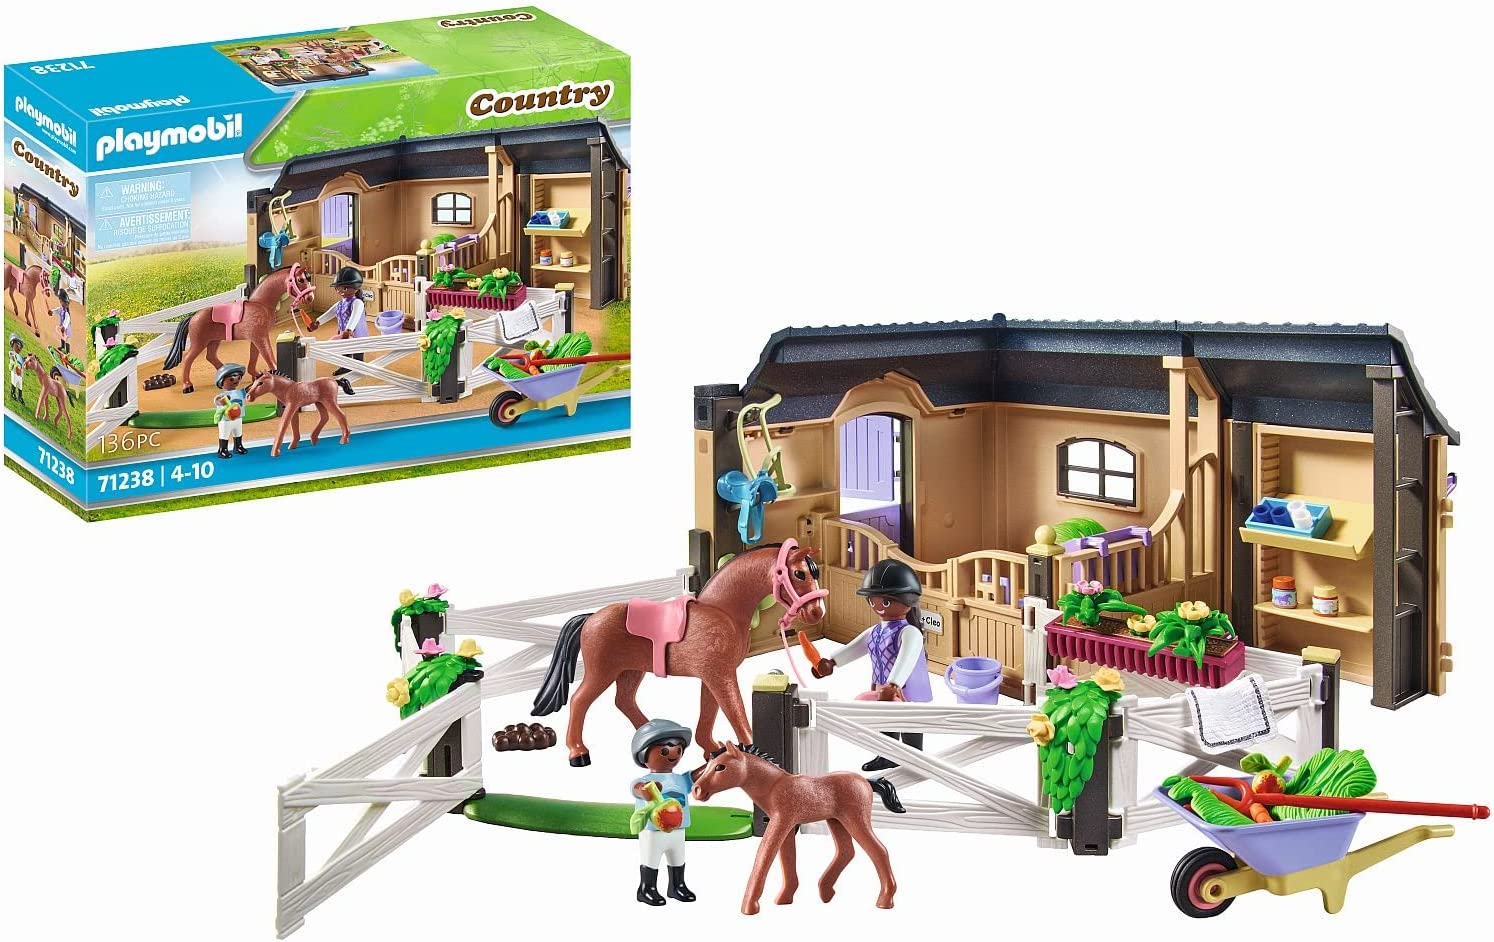 Playmobil Country 71238 HORSE RIDING HUTH WITH SMALL Extension and Run Horse with Foal for the Riding Yard Toy for Children from 4 years